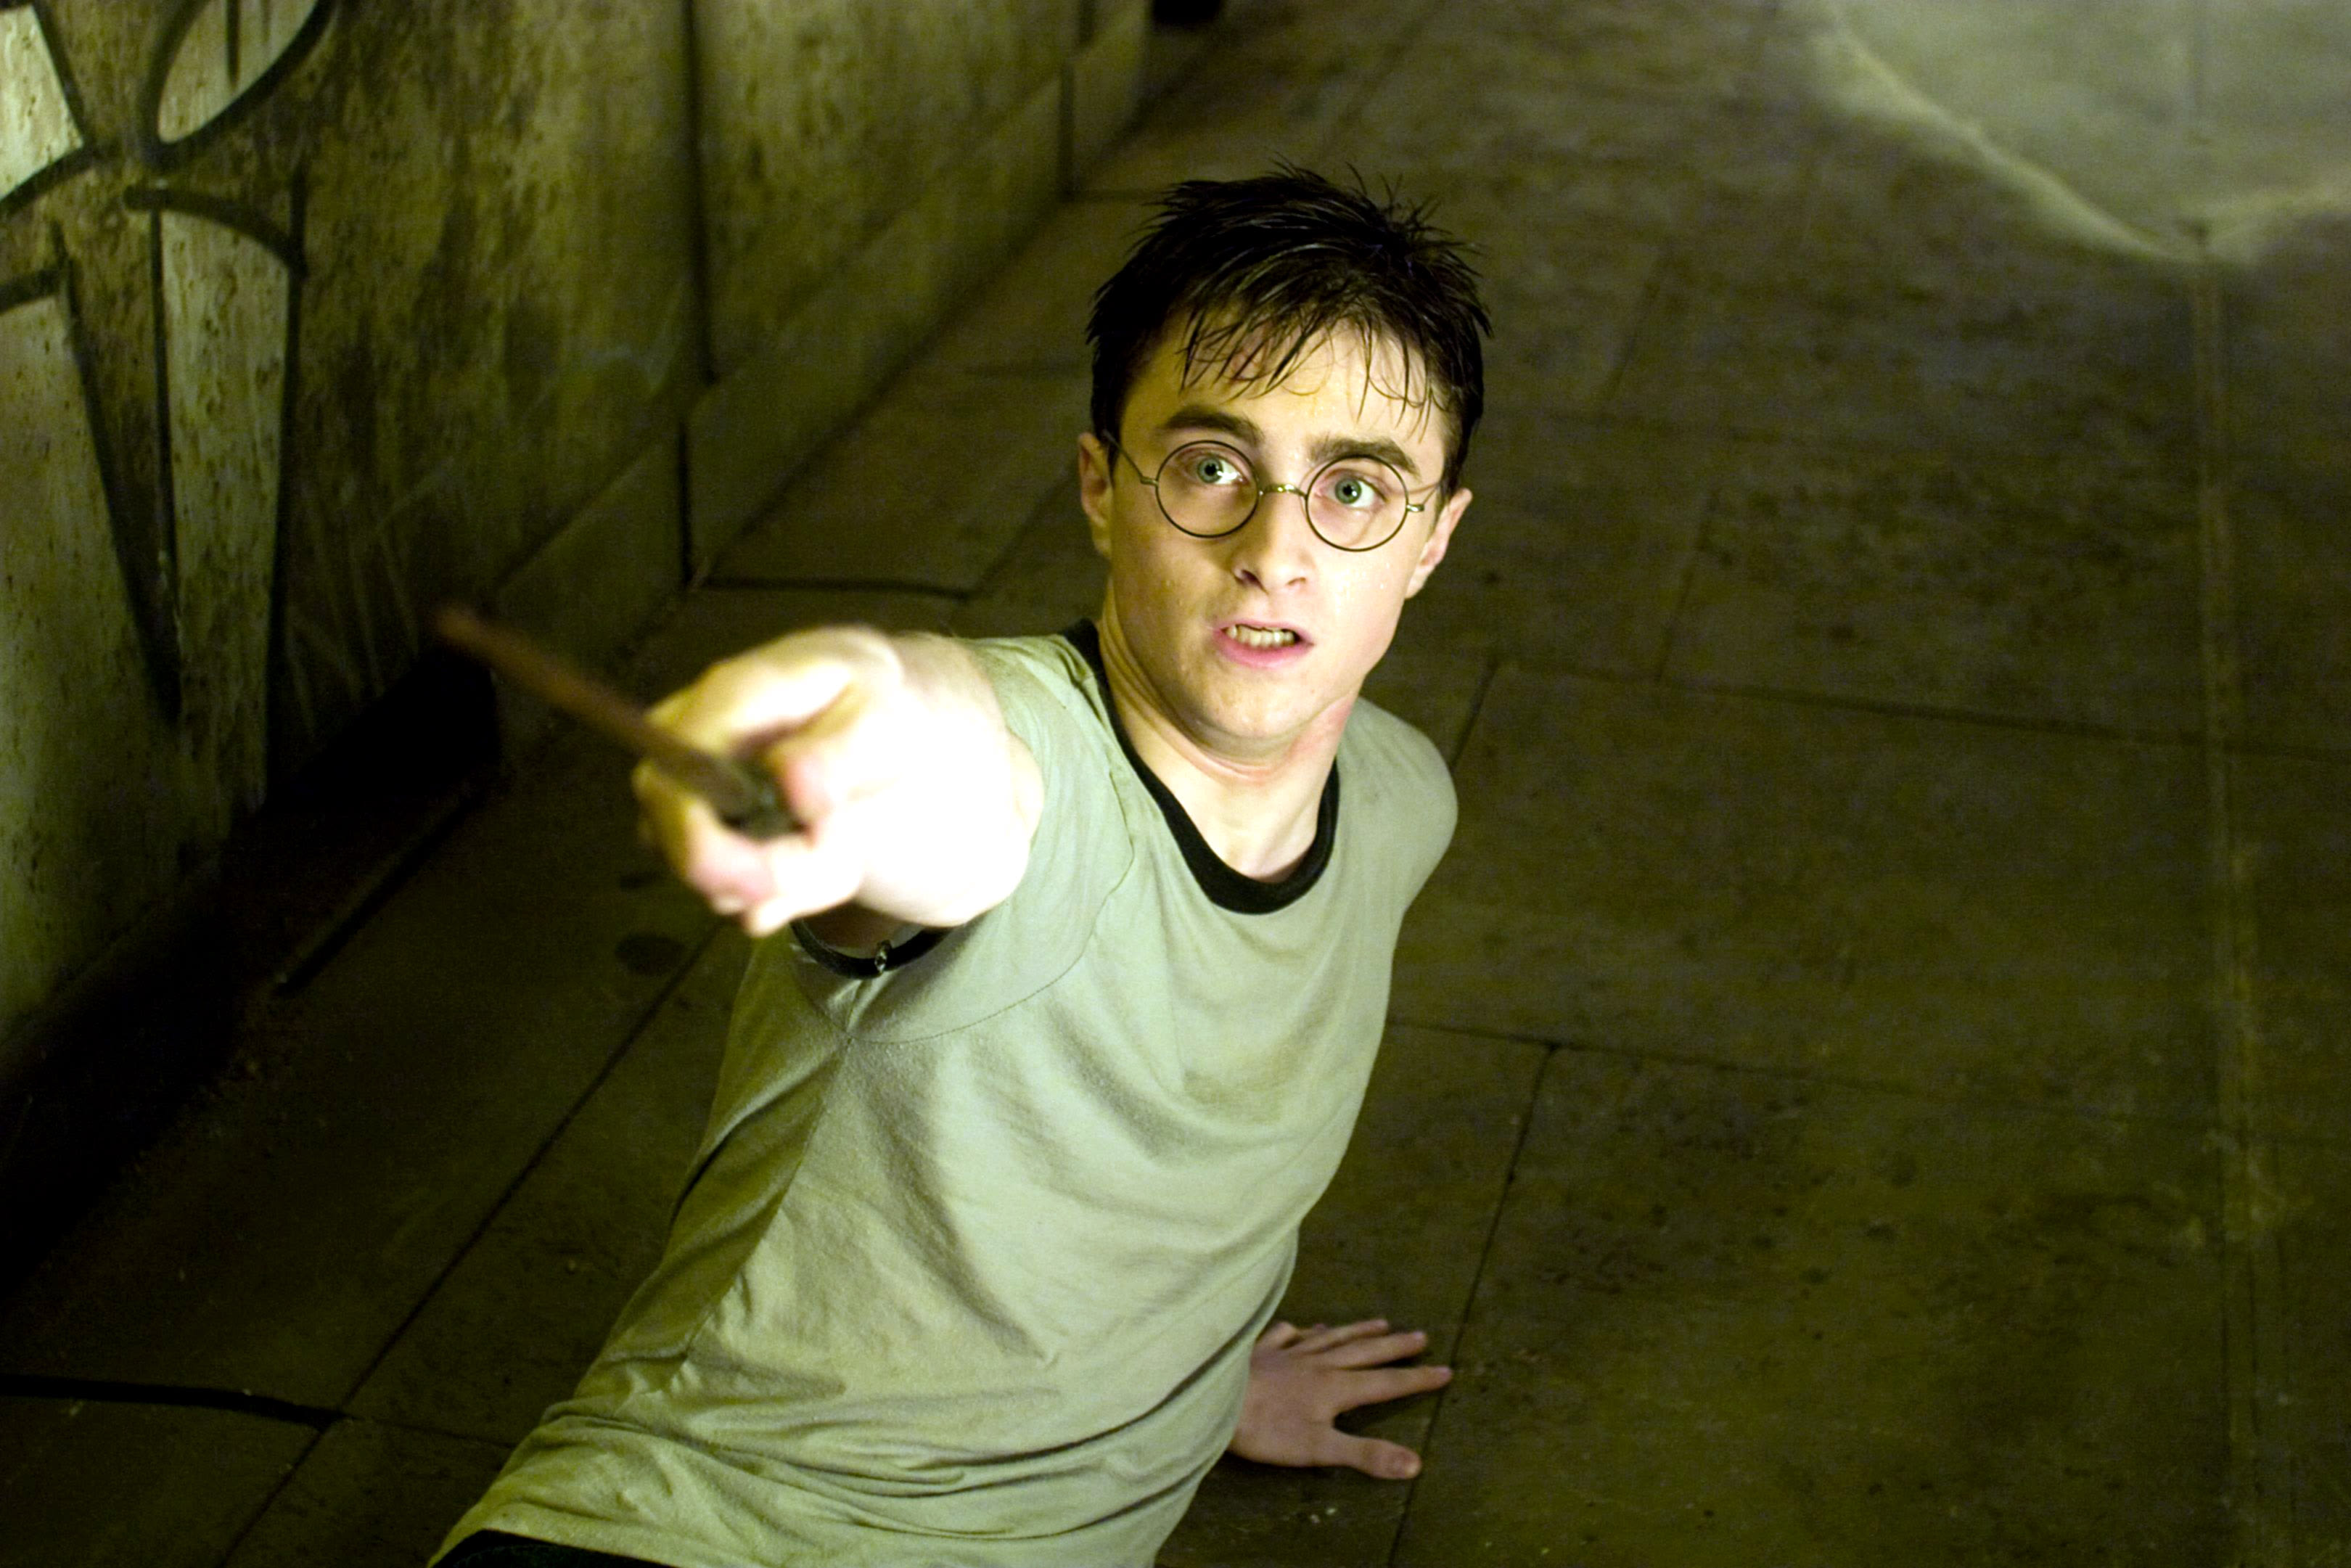 Daniel Radcliffe Says ‘Harry Potter’ TV Series ‘Very Wisely’ Wants to Be a ‘Clean Break’ From the Movies: ‘I Don...